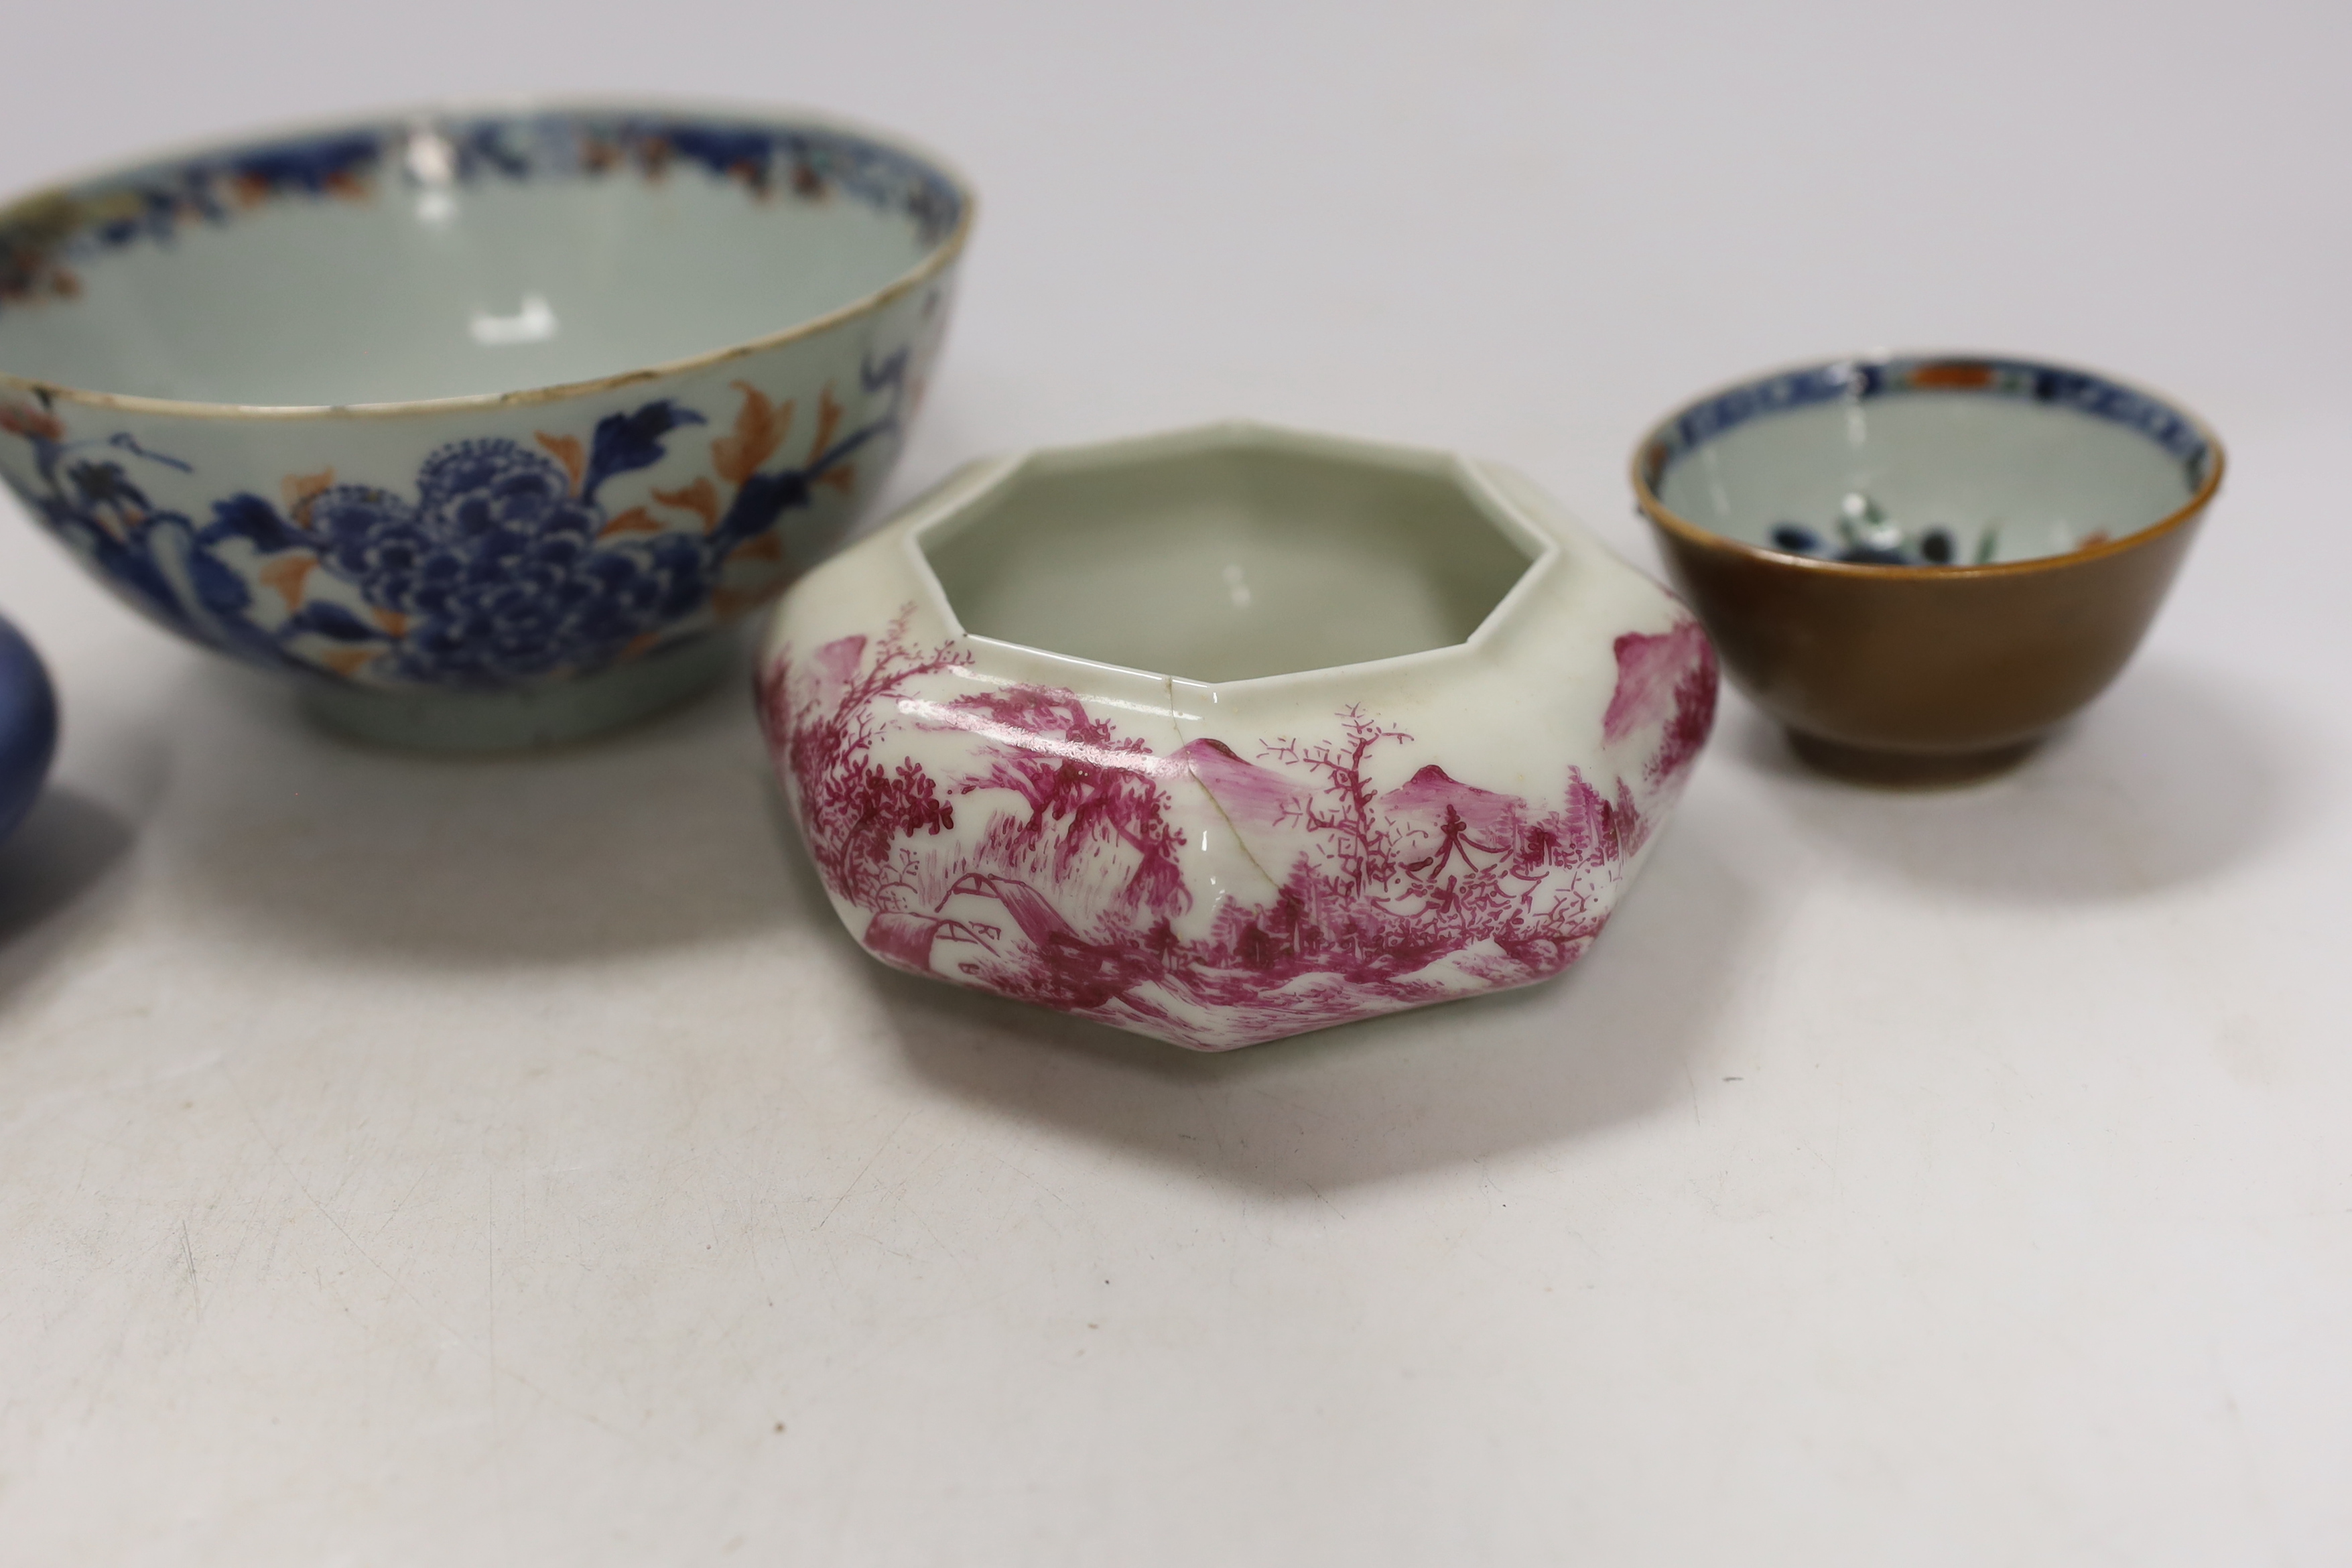 A Chinese Clare de lune glazed brushwasher, a famille rose box and cover, an octagonal puce enamelled brushwasher, an 18th century bowl and teabowl, largest 15cm in diameter (5)